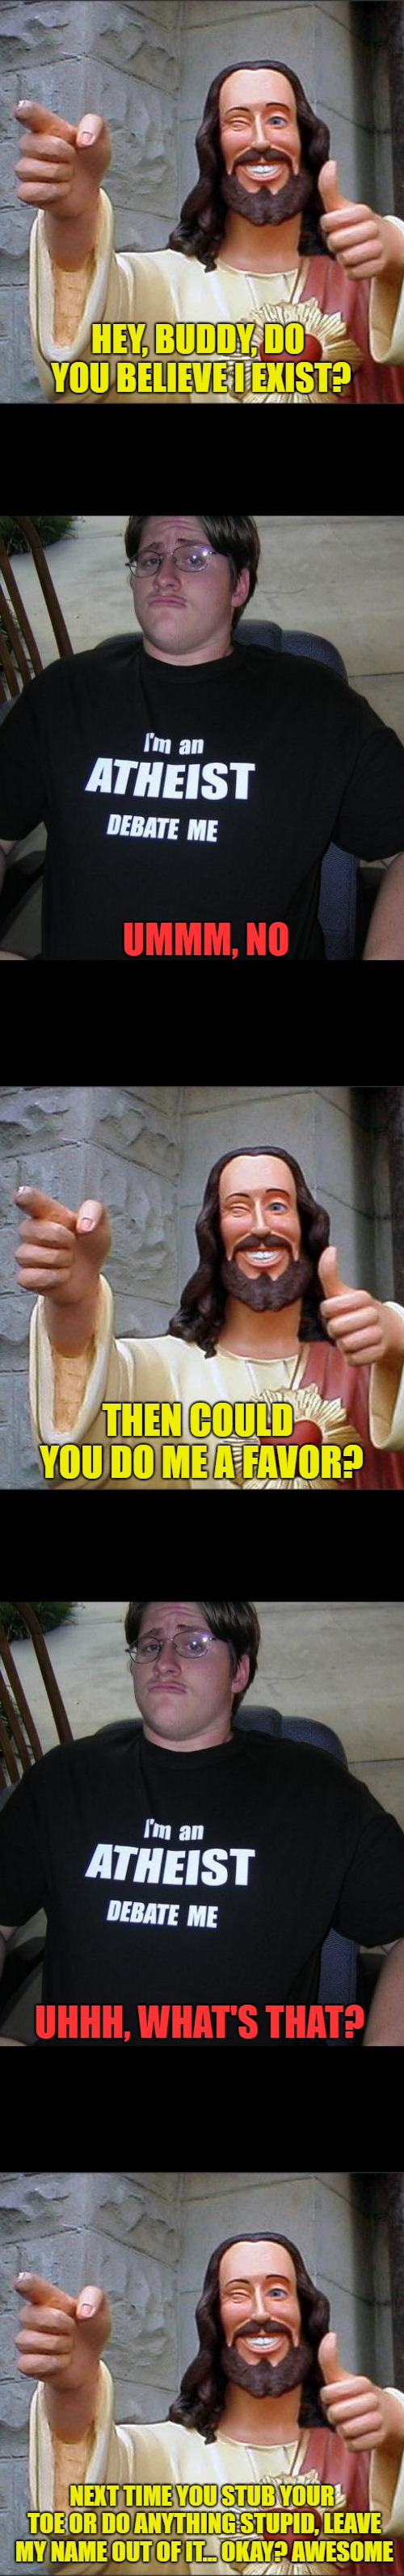 HEY, BUDDY, DO YOU BELIEVE I EXIST? UMMM, NO; THEN COULD YOU DO ME A FAVOR? UHHH, WHAT'S THAT? NEXT TIME YOU STUB YOUR TOE OR DO ANYTHING STUPID, LEAVE MY NAME OUT OF IT... OKAY? AWESOME | image tagged in memes,buddy christ,atheist,original content only | made w/ Imgflip meme maker